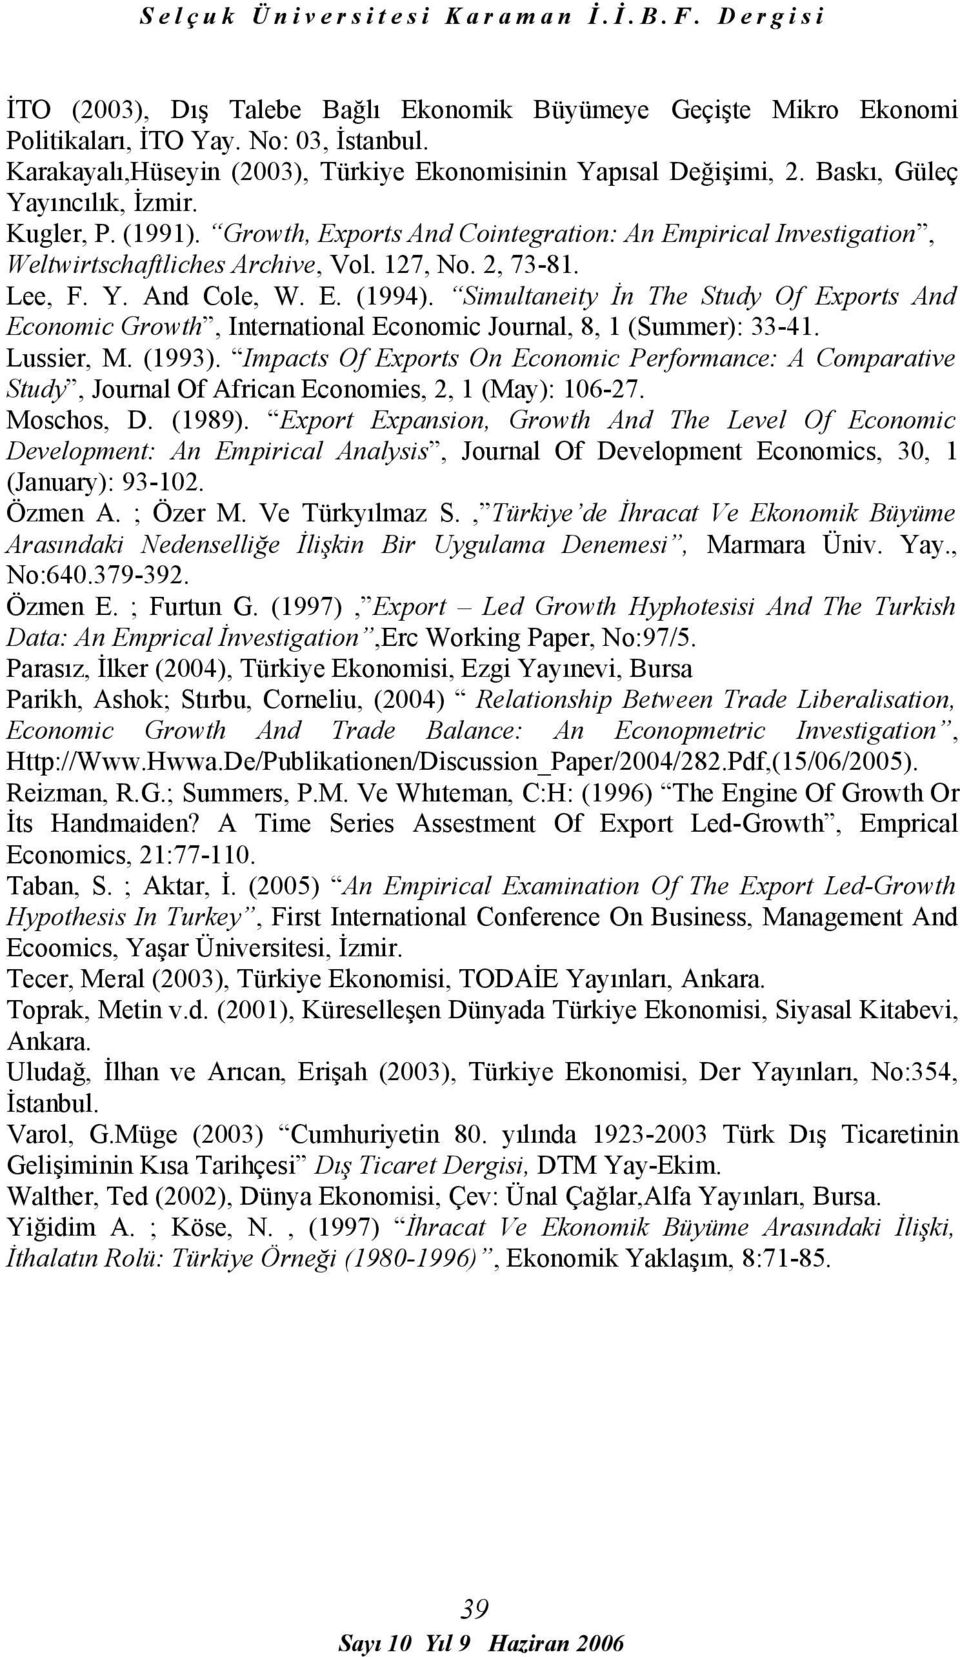 Simultaneity İn The Study Of Exports And Economic Growth, International Economic Journal, 8, 1 (Summer): 33-41. Lussier, M. (1993).